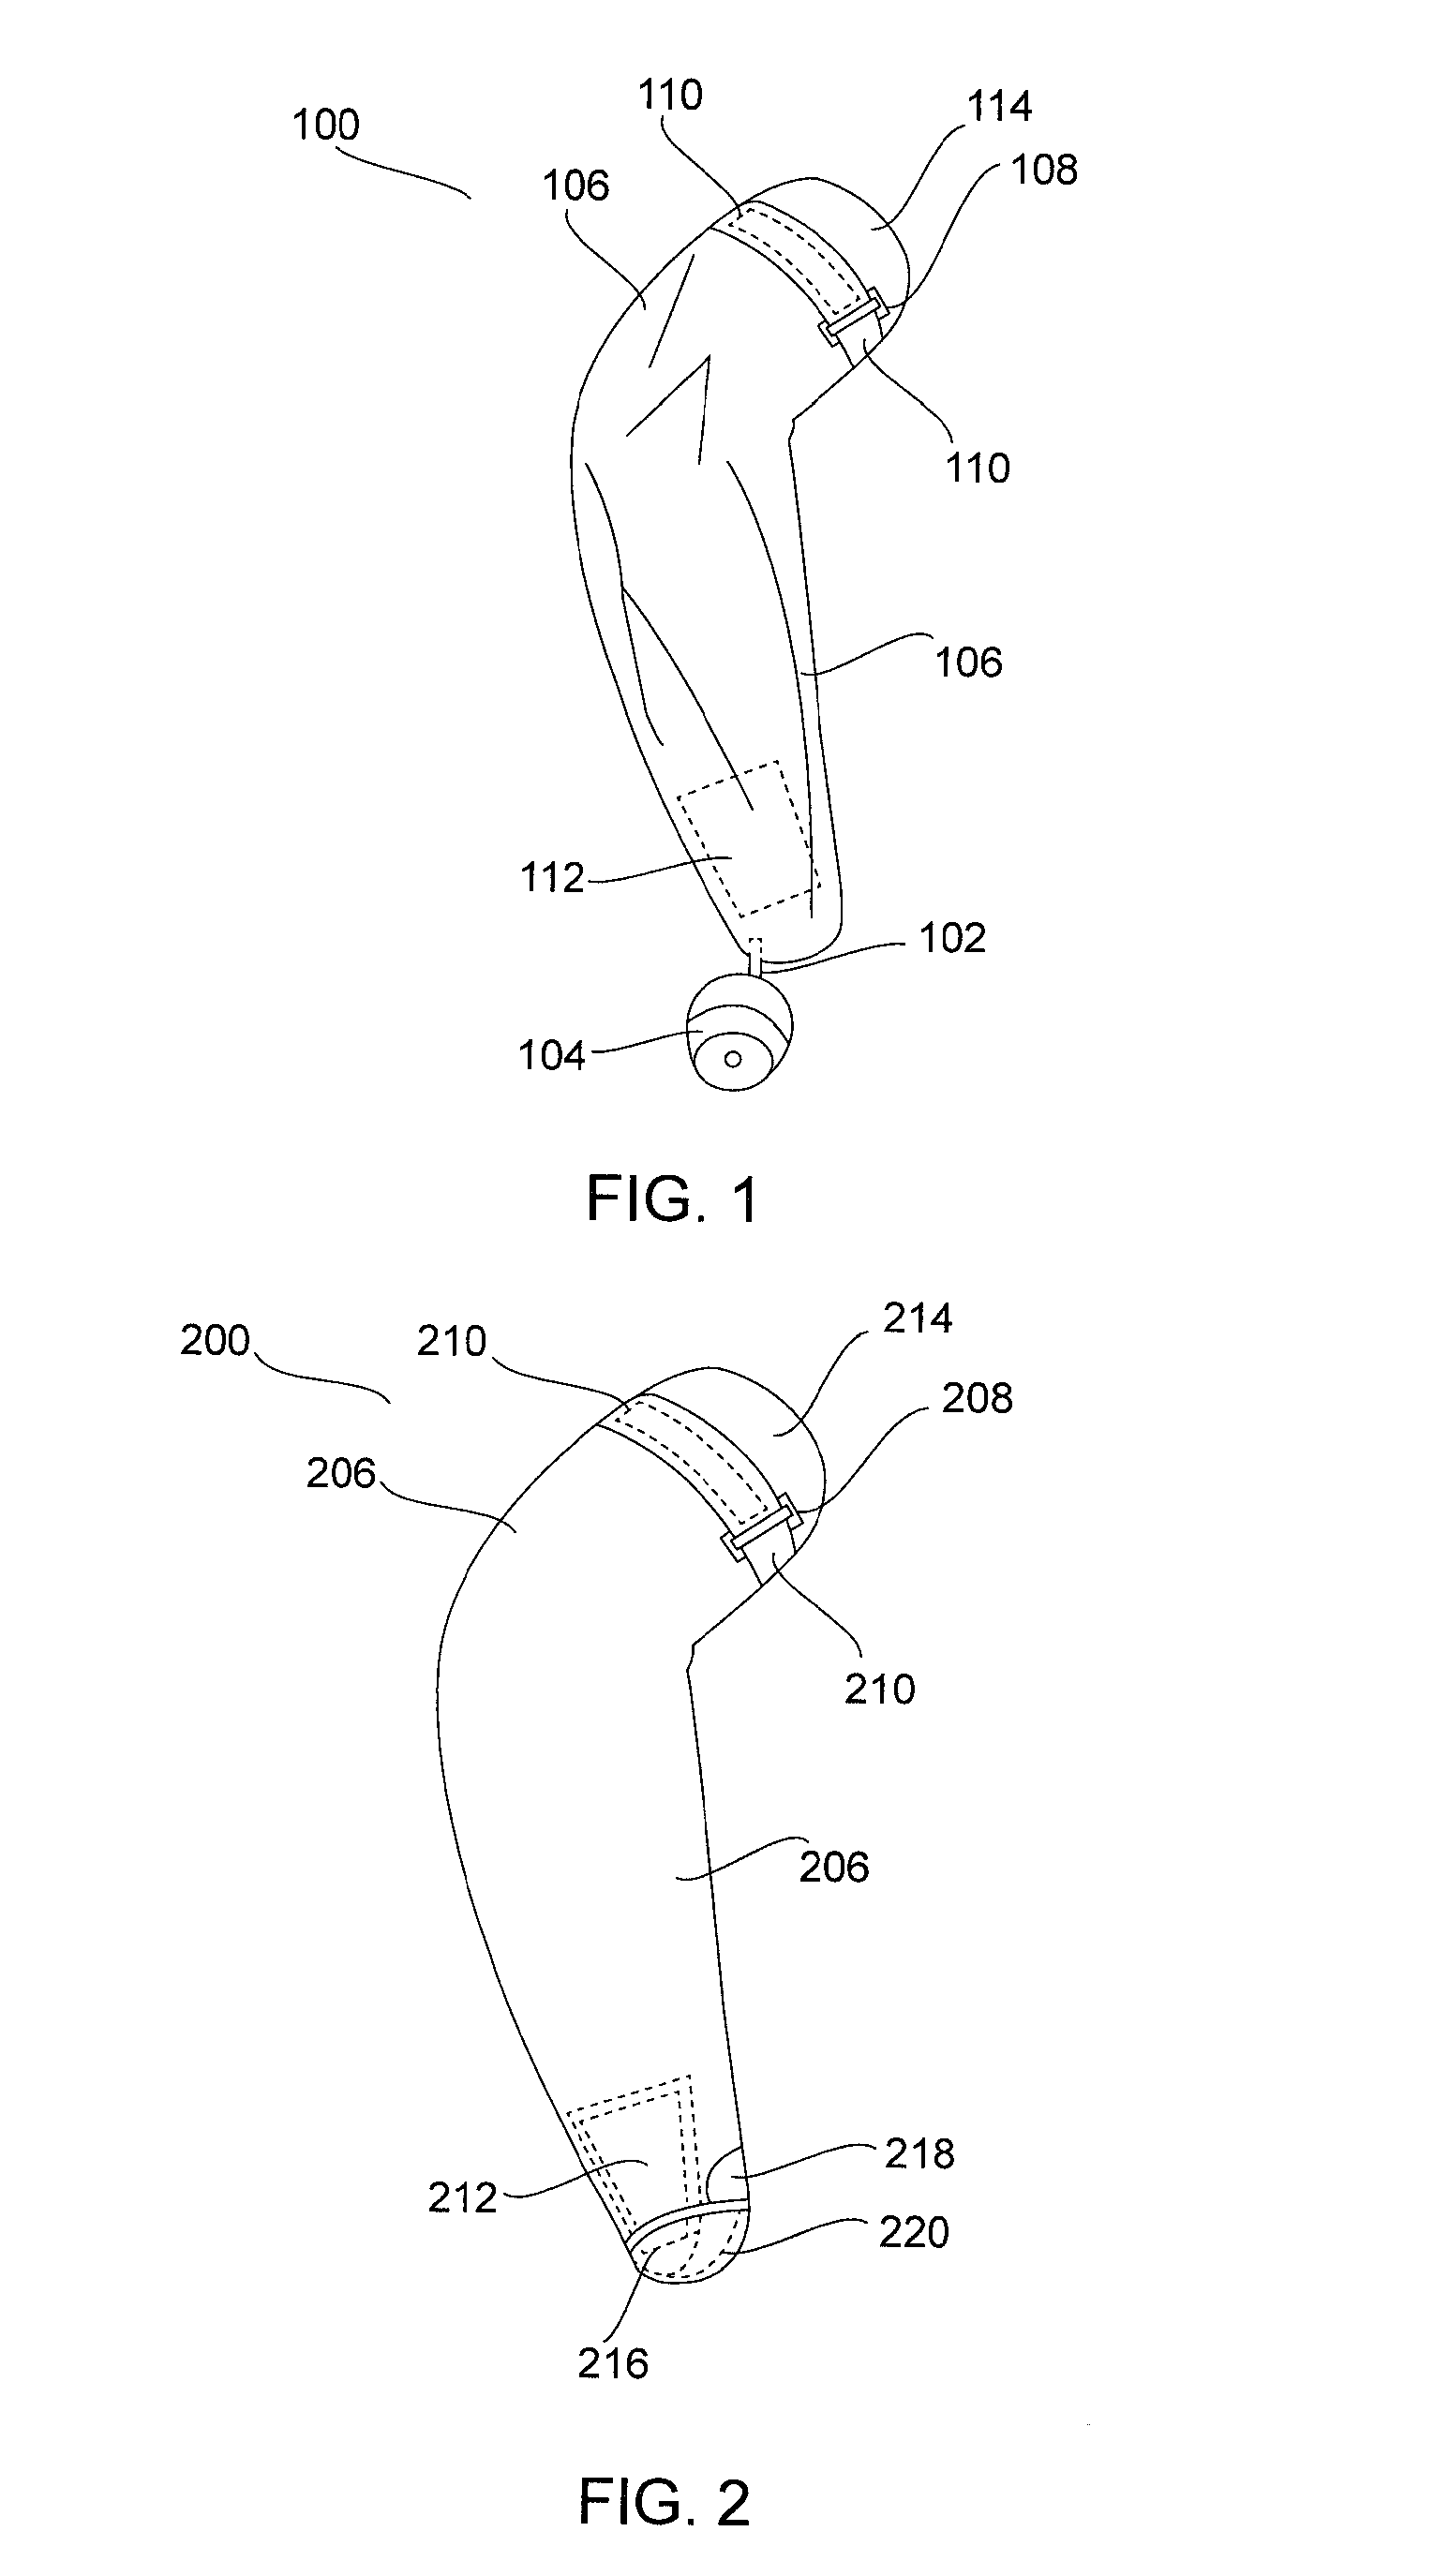 Apparatus for assisting with the physiological recovery from fatigue, stress or injury